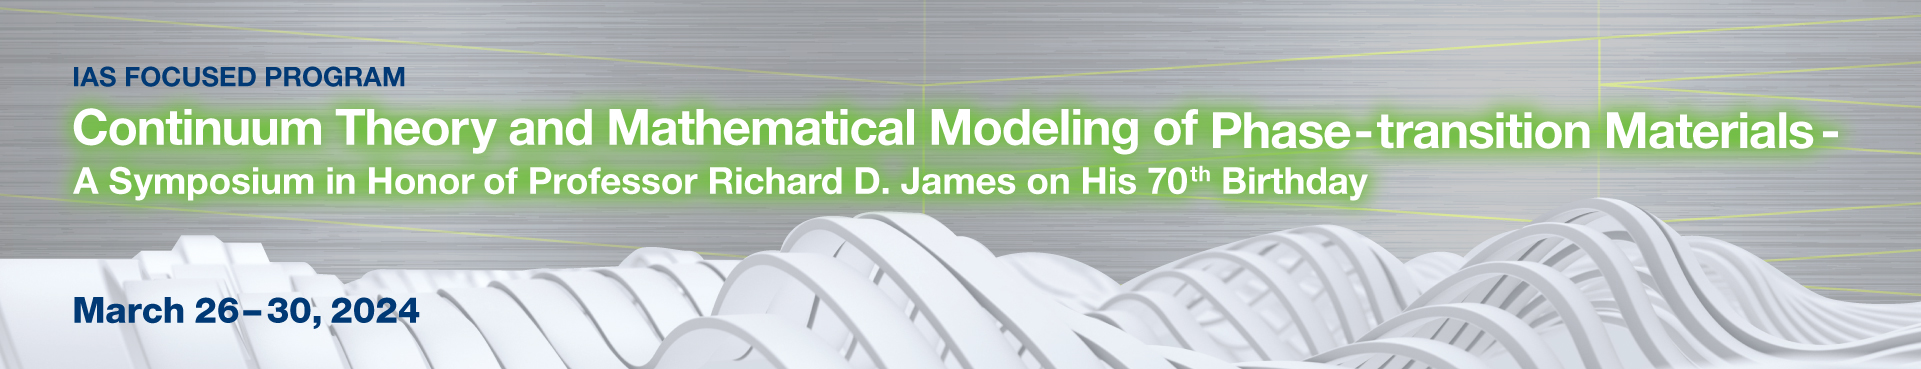 IAS Focused Program on Continuum theory and mathematical modeling of phase-transition materials - A symposium in honor of Professor Richard D. James on his 70th birthday (March 26-30, 2024)
